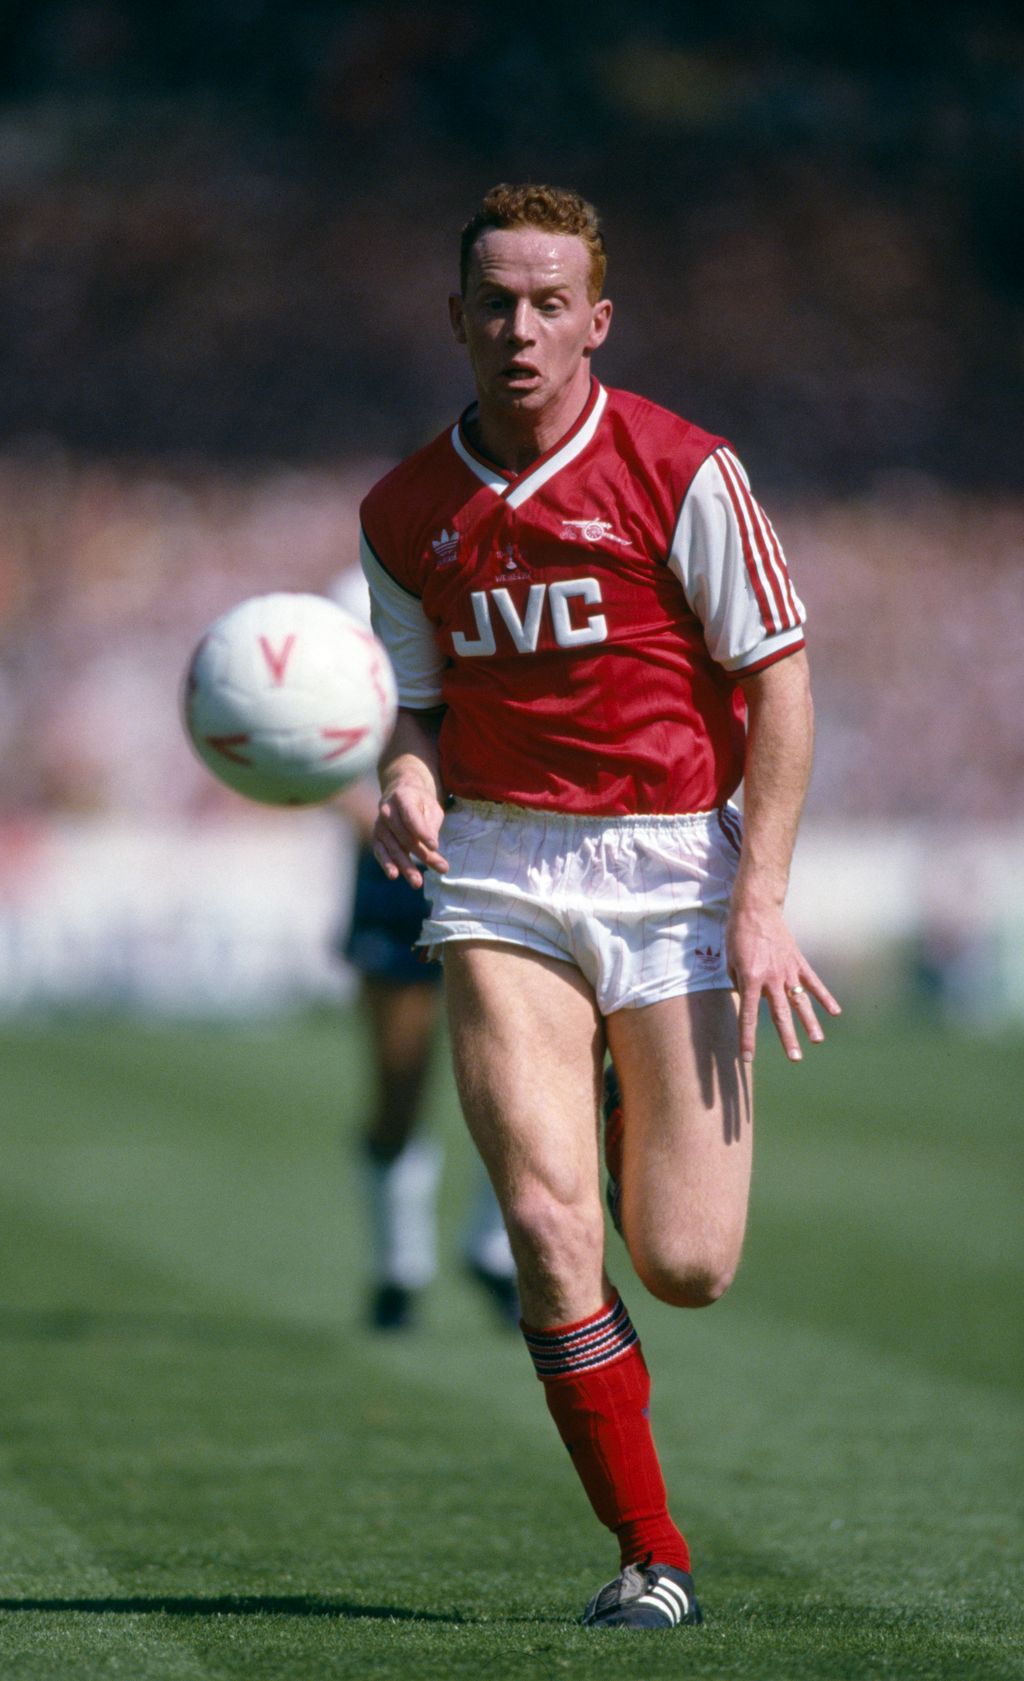  203 apps 28 goals 2 First Division Titles 1 League Cup

Happy 52nd Birthday, Perry Groves! 